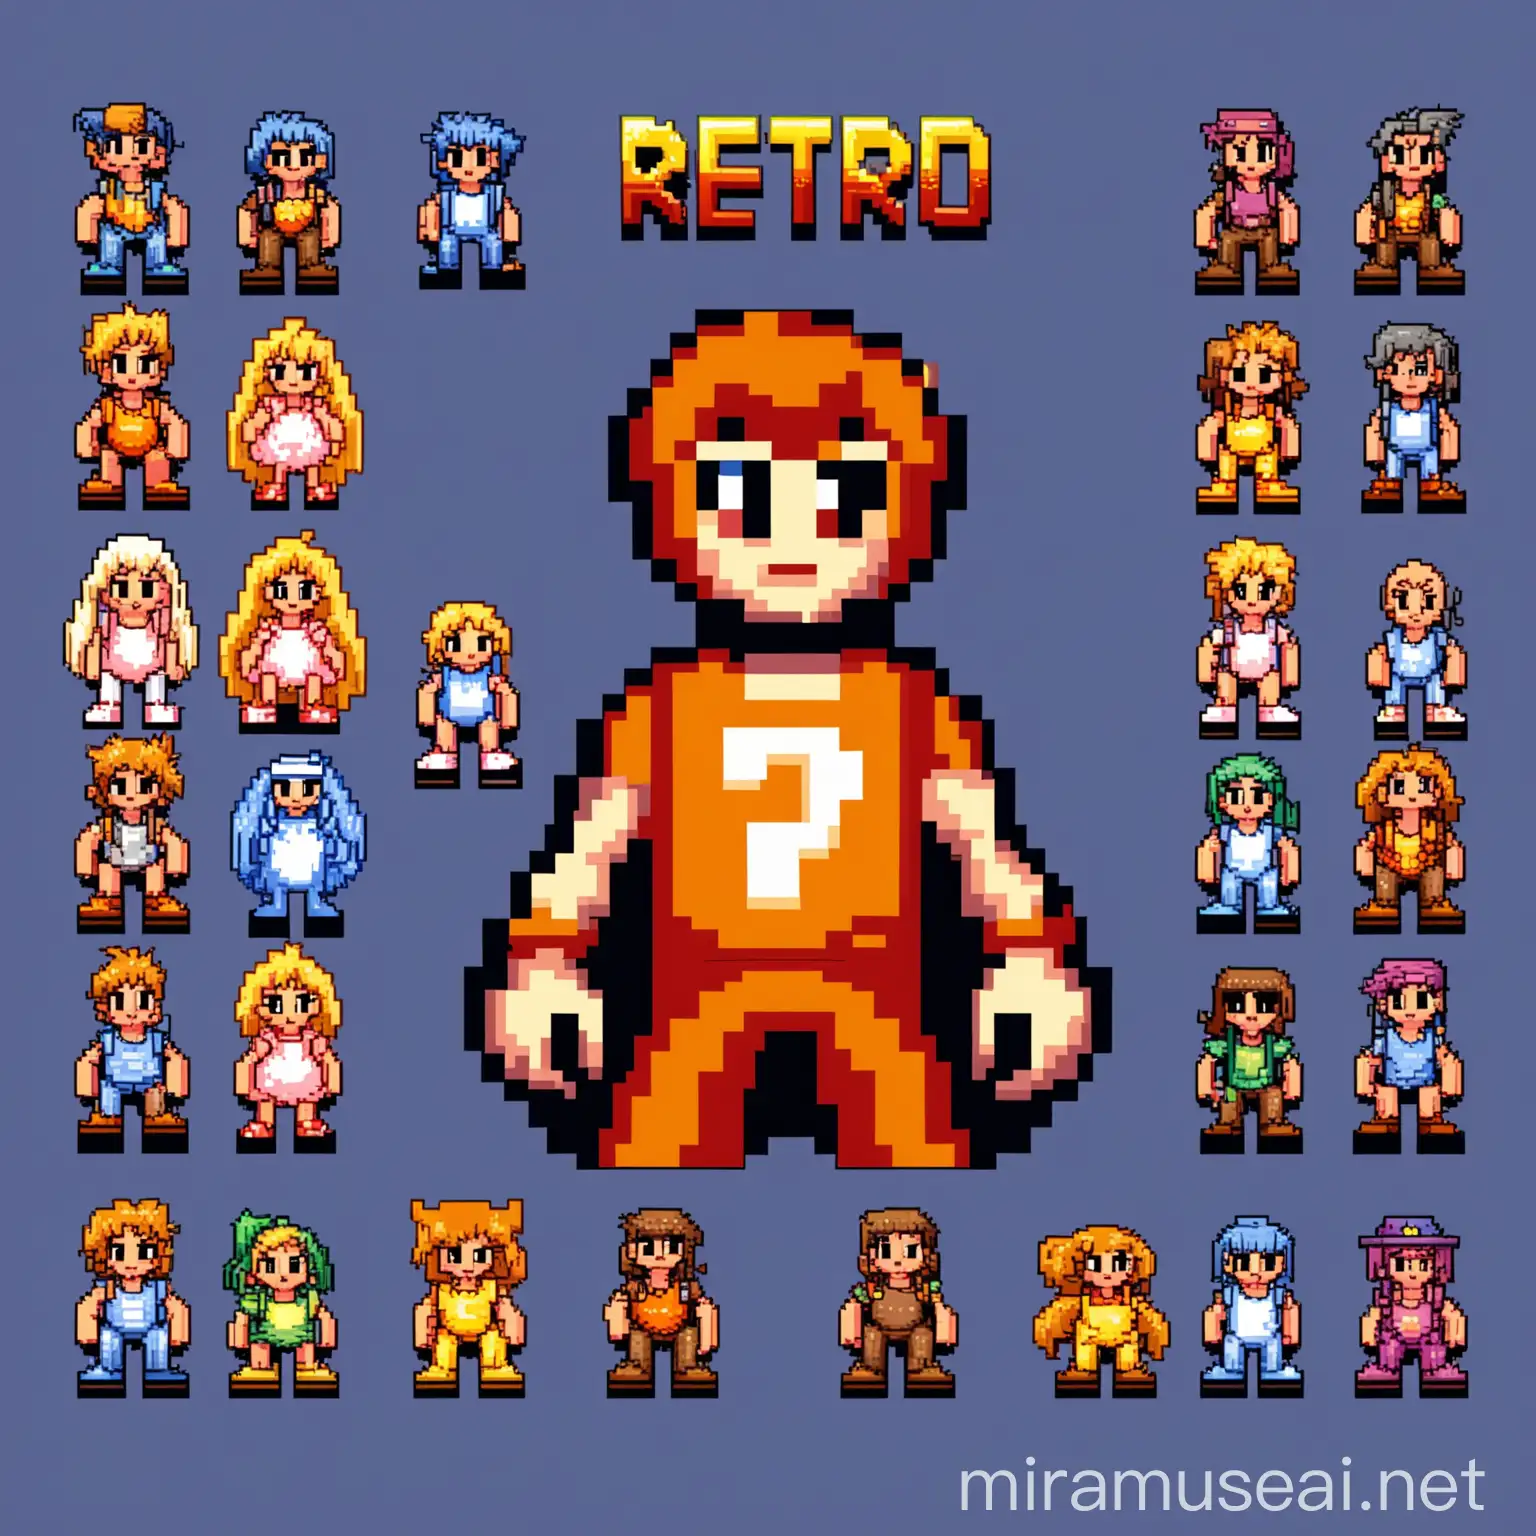 Pixel Retro Game Playable Character with Classic 8Bit Aesthetic